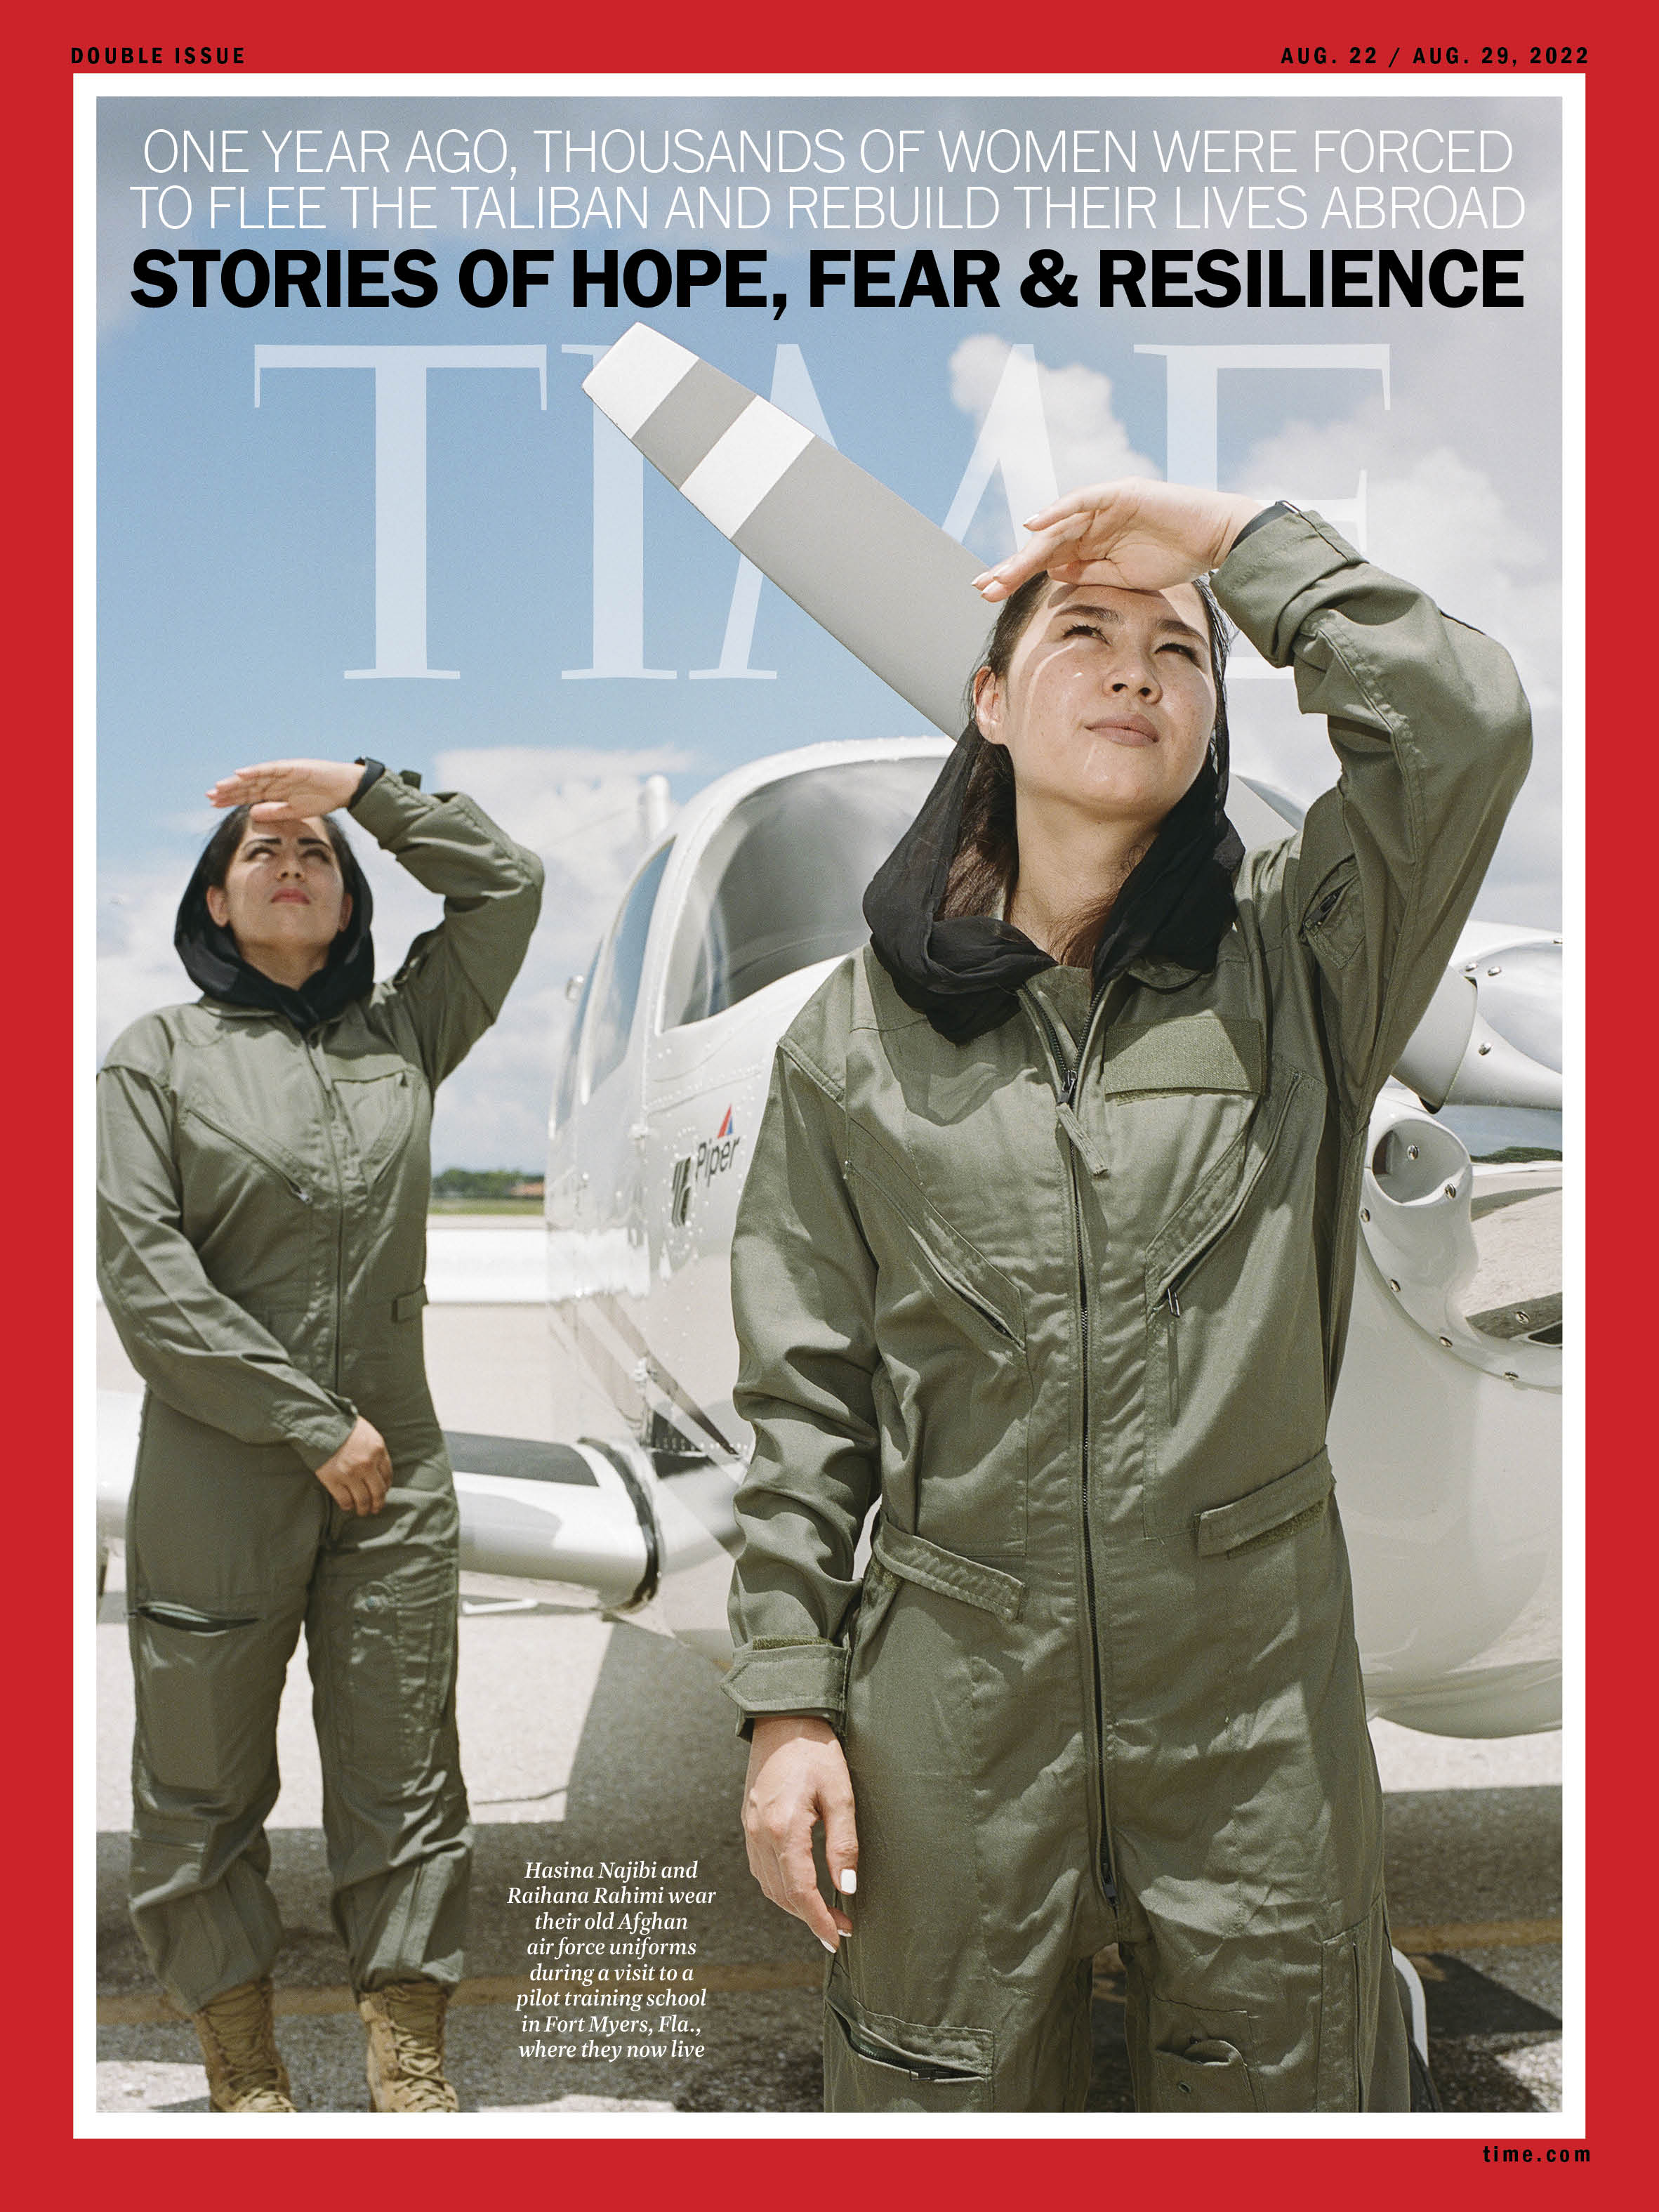 TIME's cover on Afghan women one year after the fall of Kabul